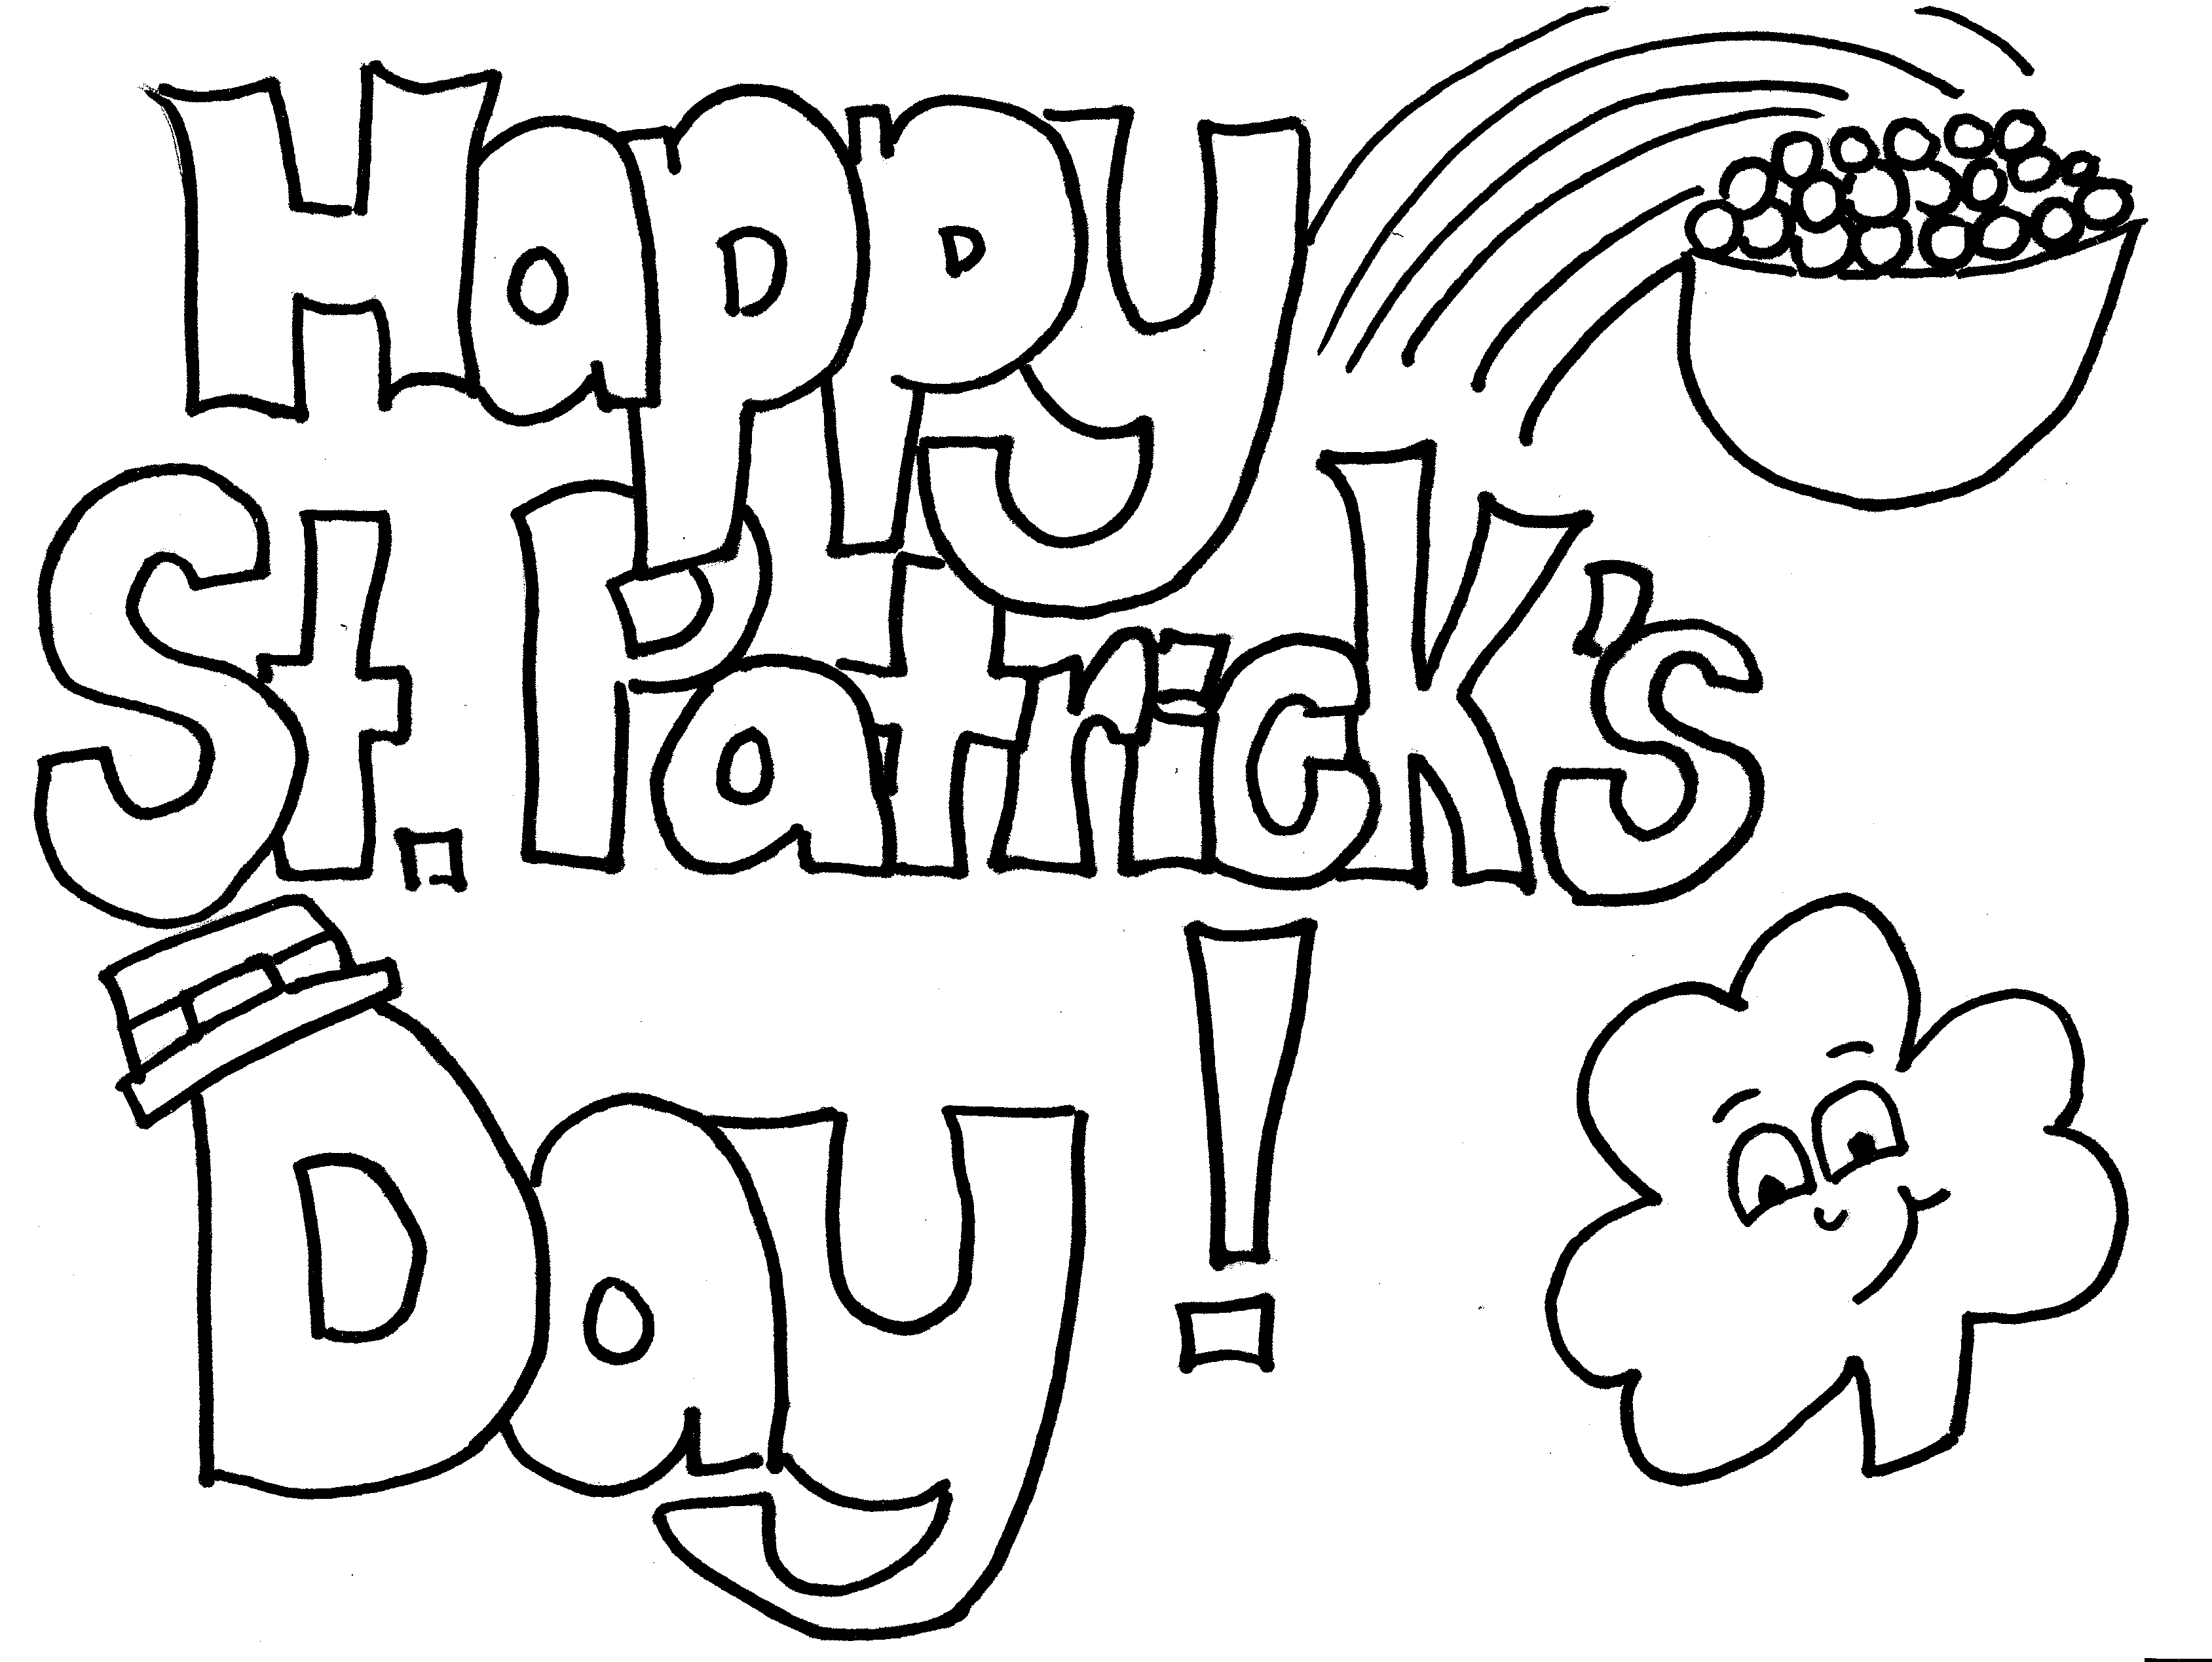 6-printable-whimsical-st-patrick-s-day-coloring-pages-for-kids